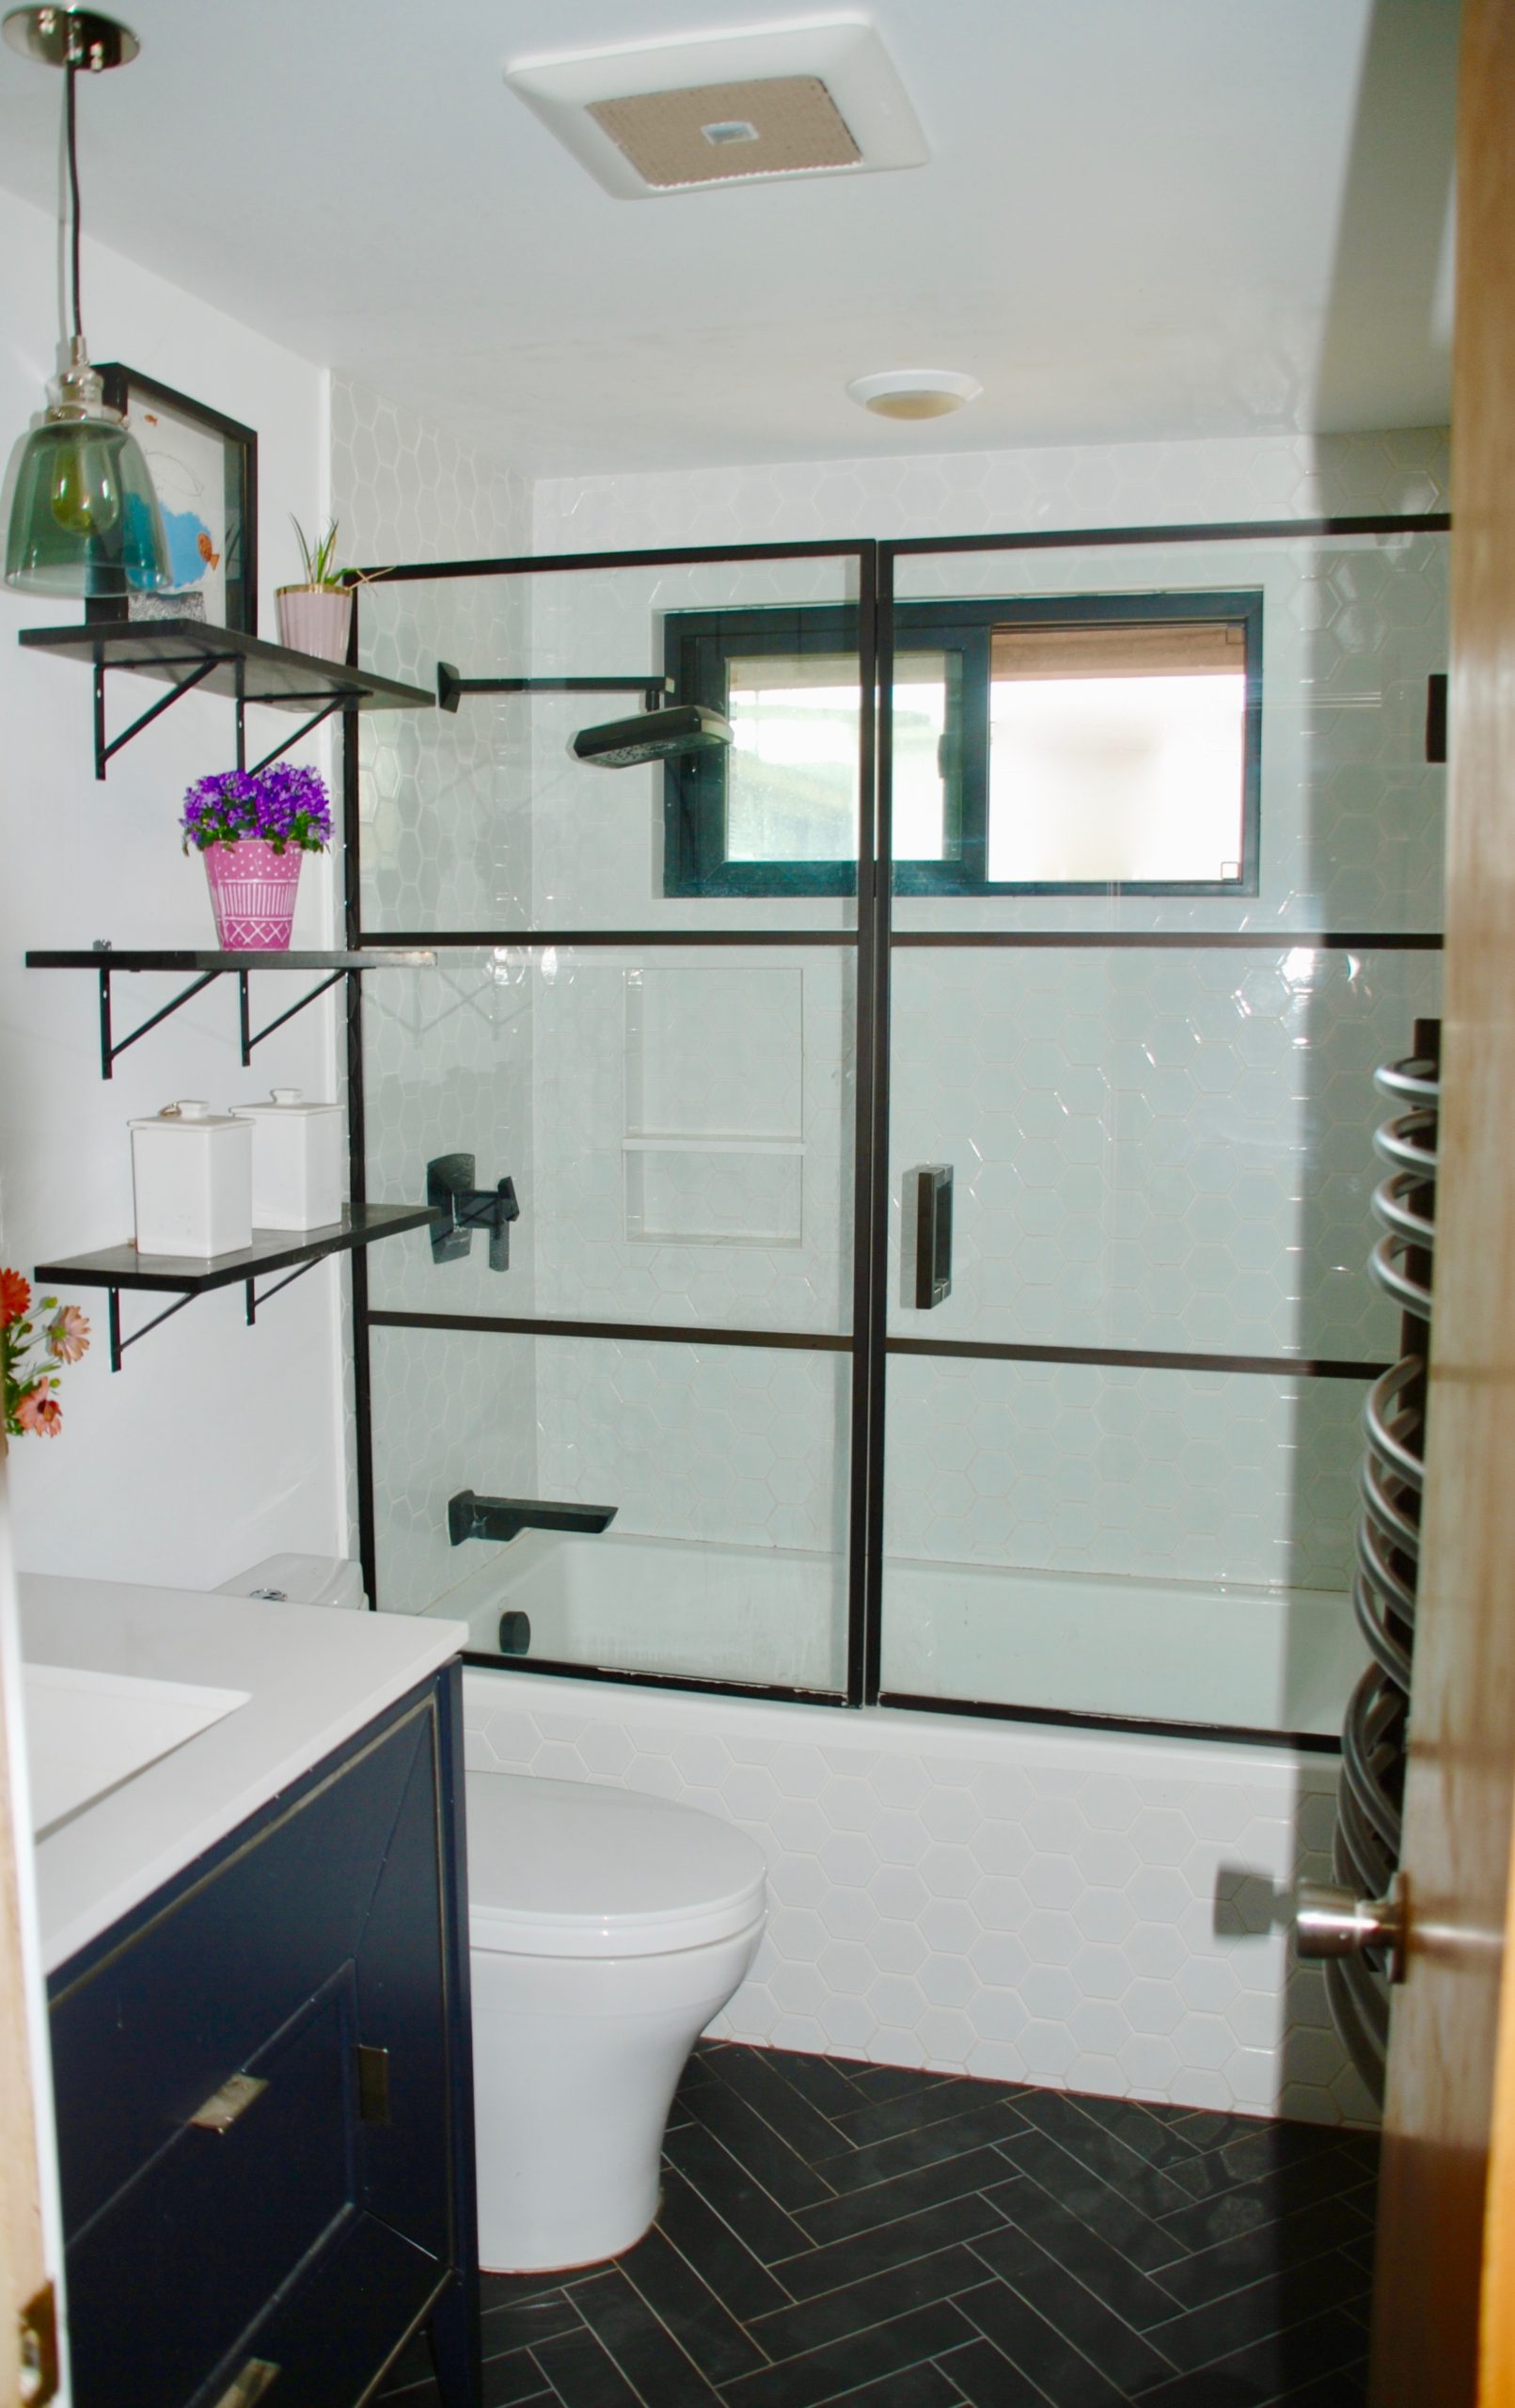 You are currently viewing Classic black and white bath room with added pattern play